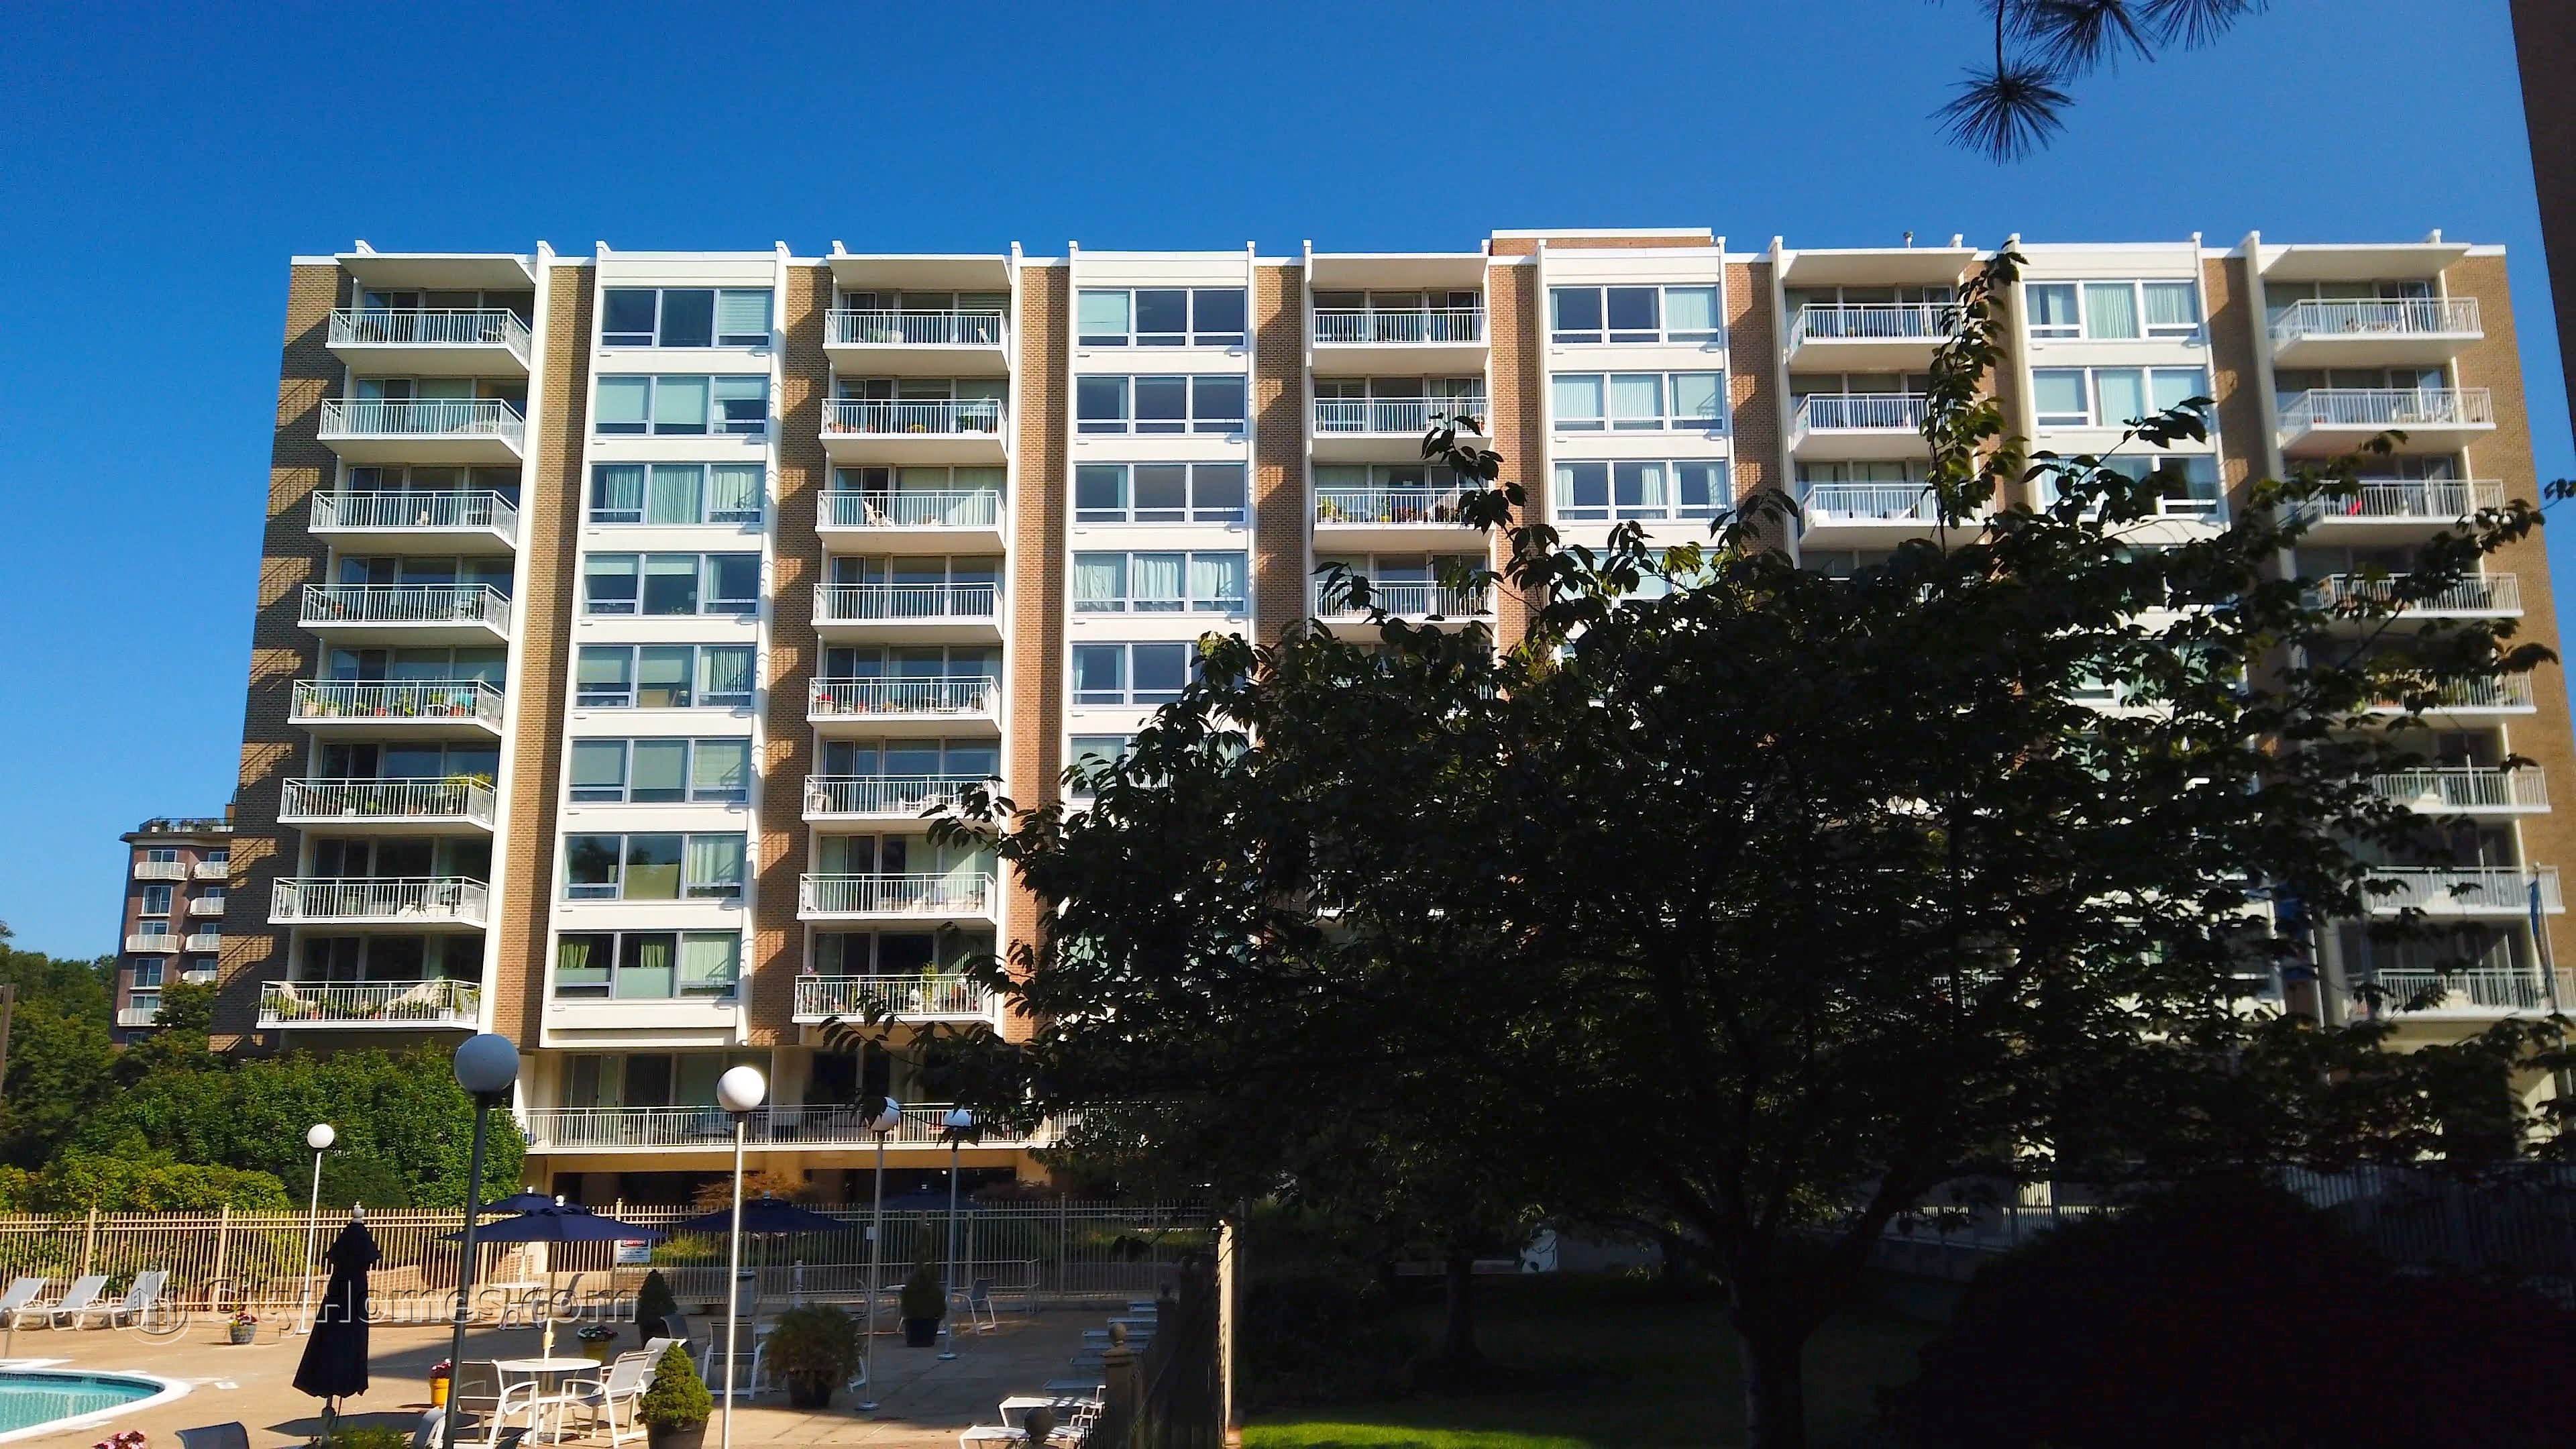 2. Riverside Condominiums xây dựng tại 1425 & 1435 4th St NW, Southwest / Waterfront, Washington, DC 20024